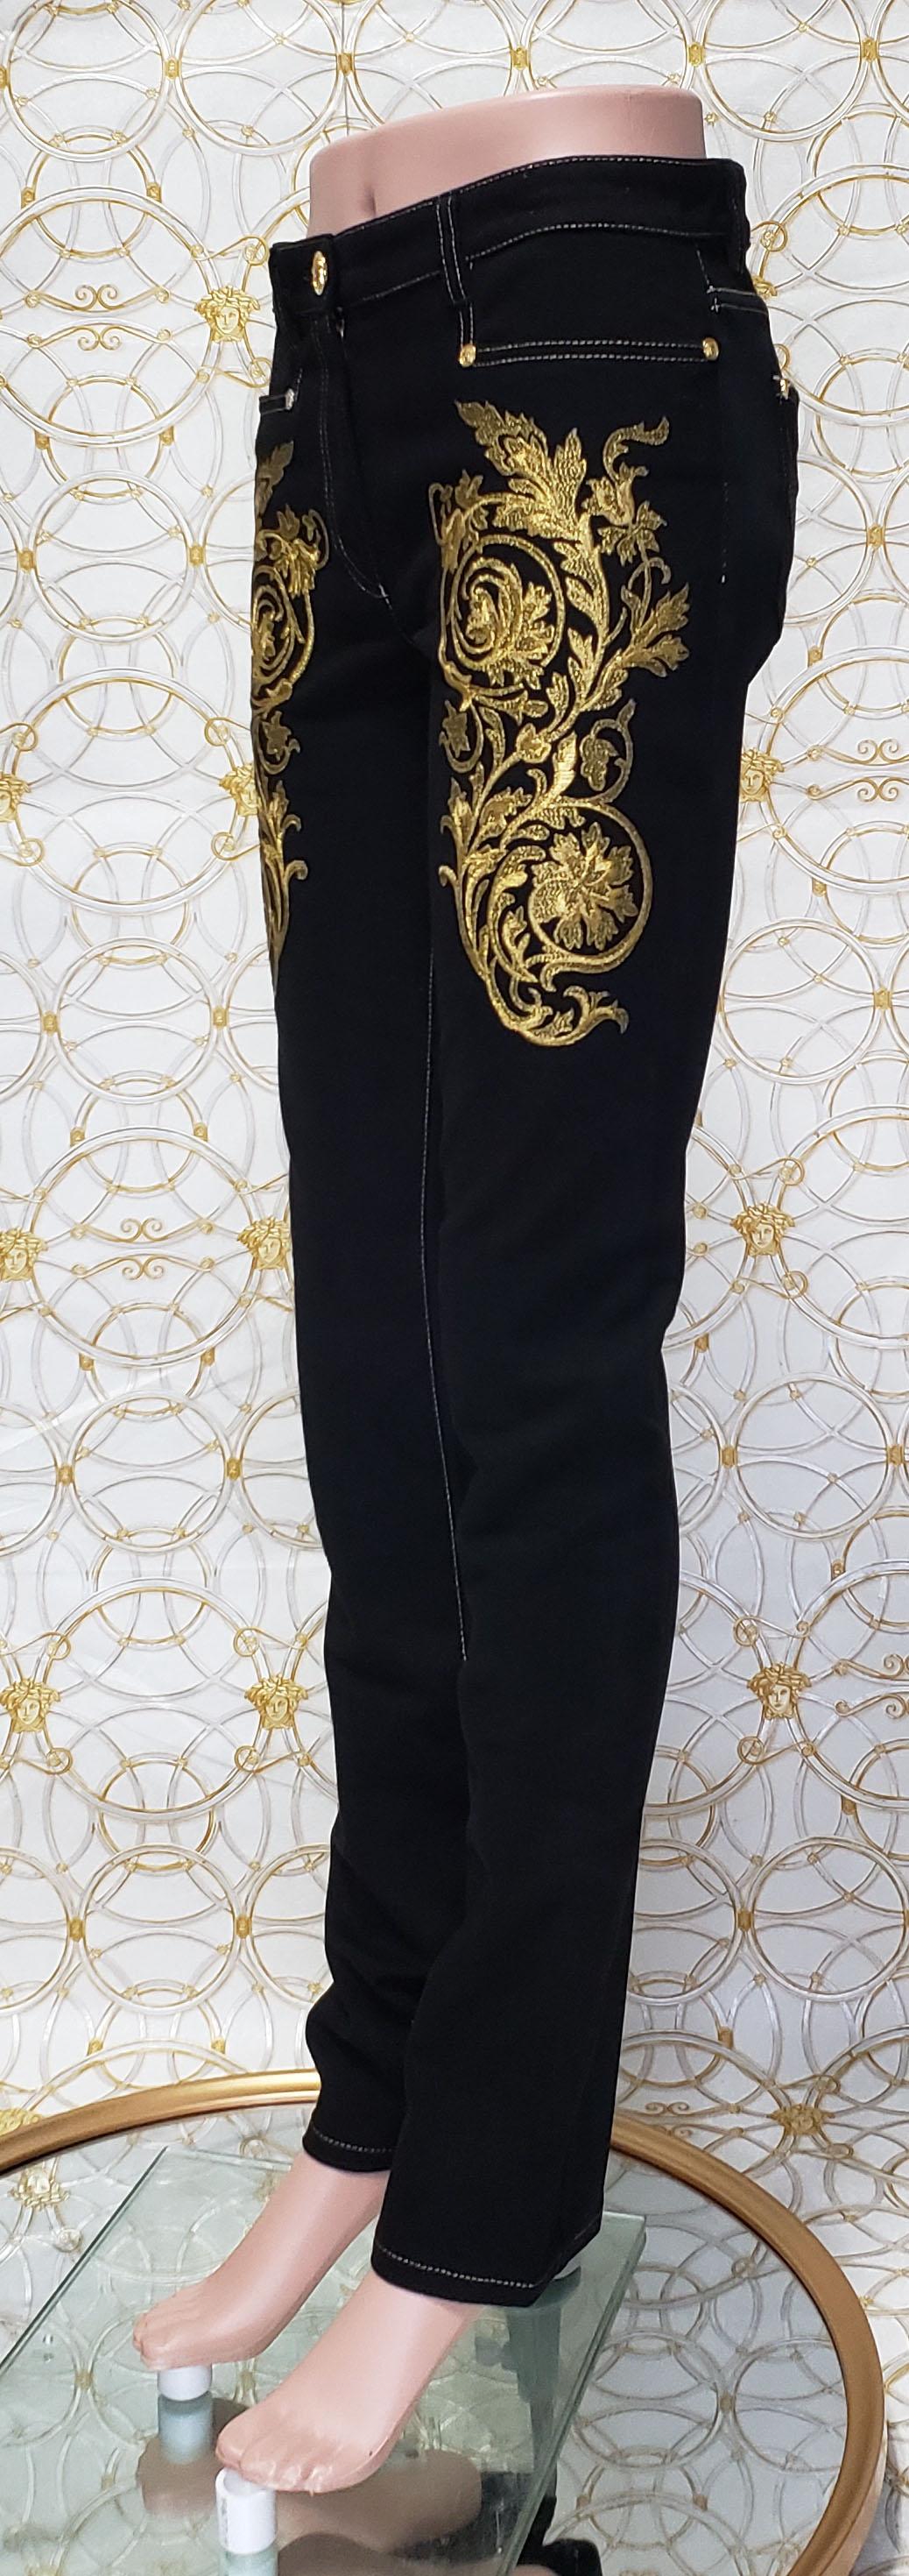 Women's Pre-Fall 2013 L # 2 BRAND NEW VERSACE BAROQUE GOLD EMBROIDERED JEANS size 26 For Sale